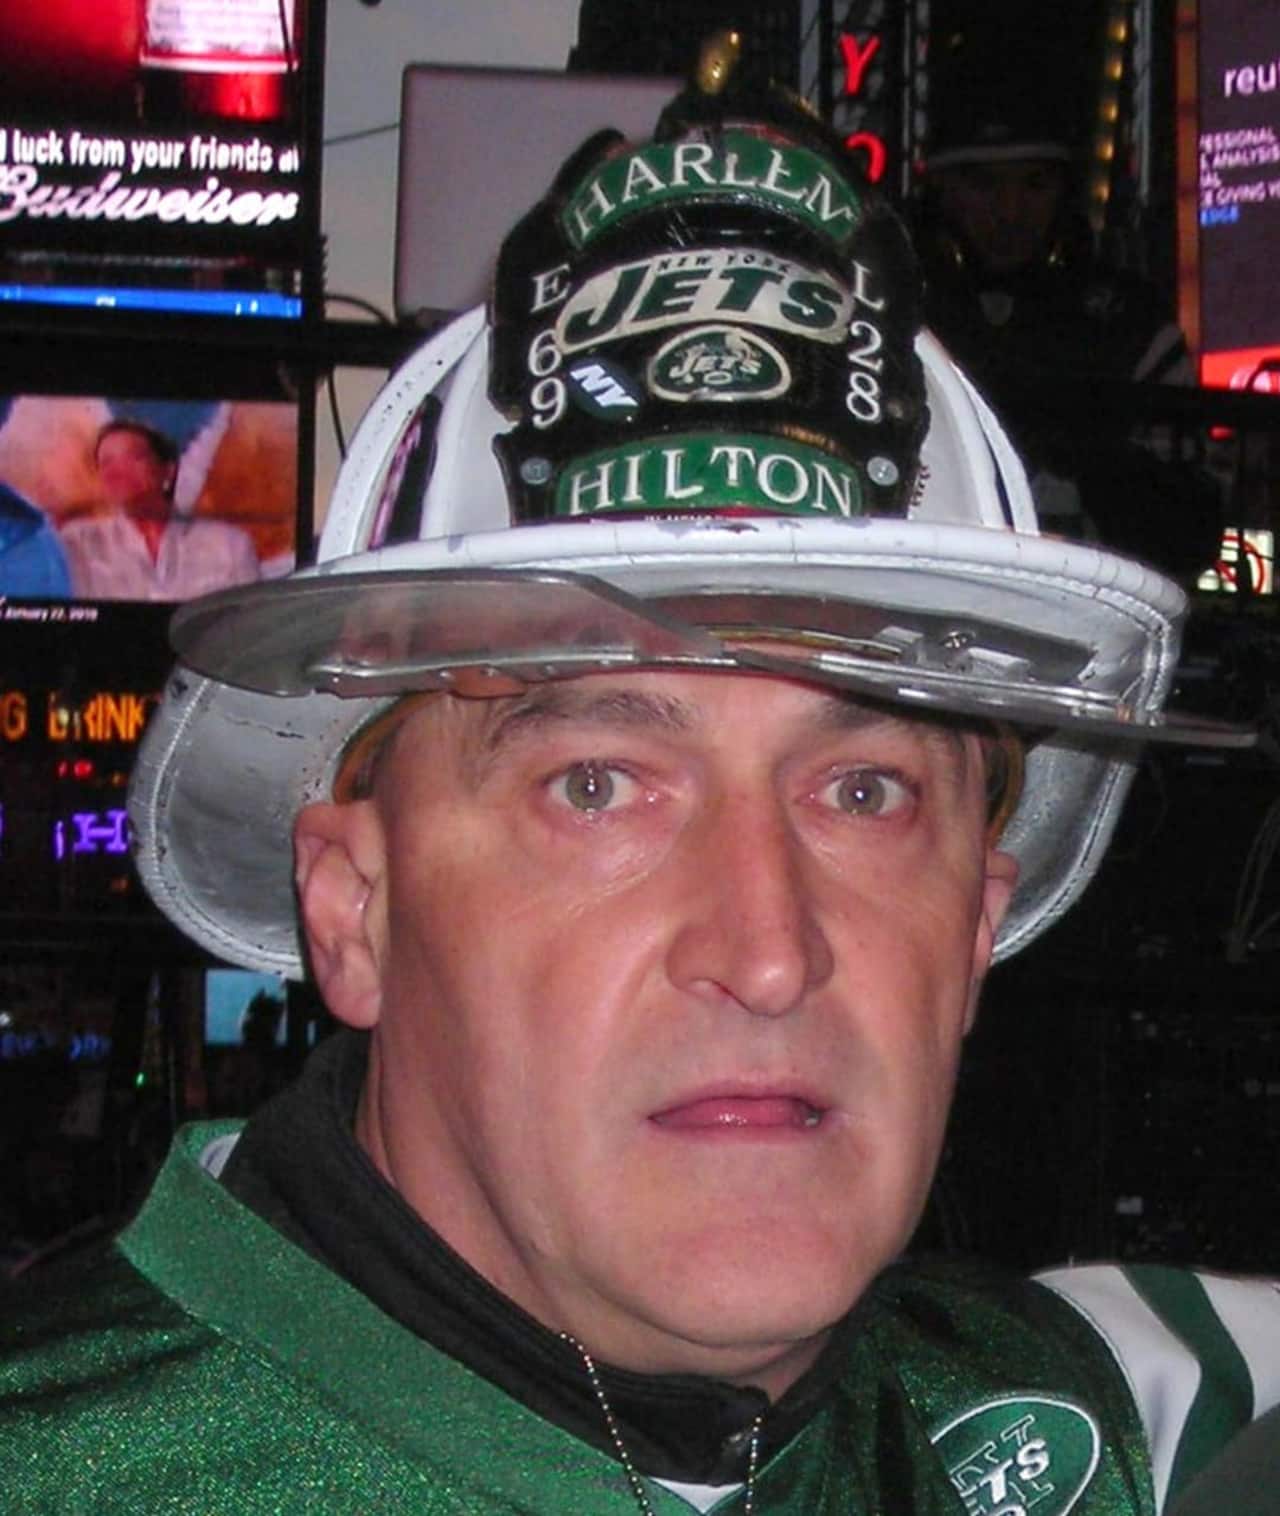 Fireman Ed of East Rutherford.